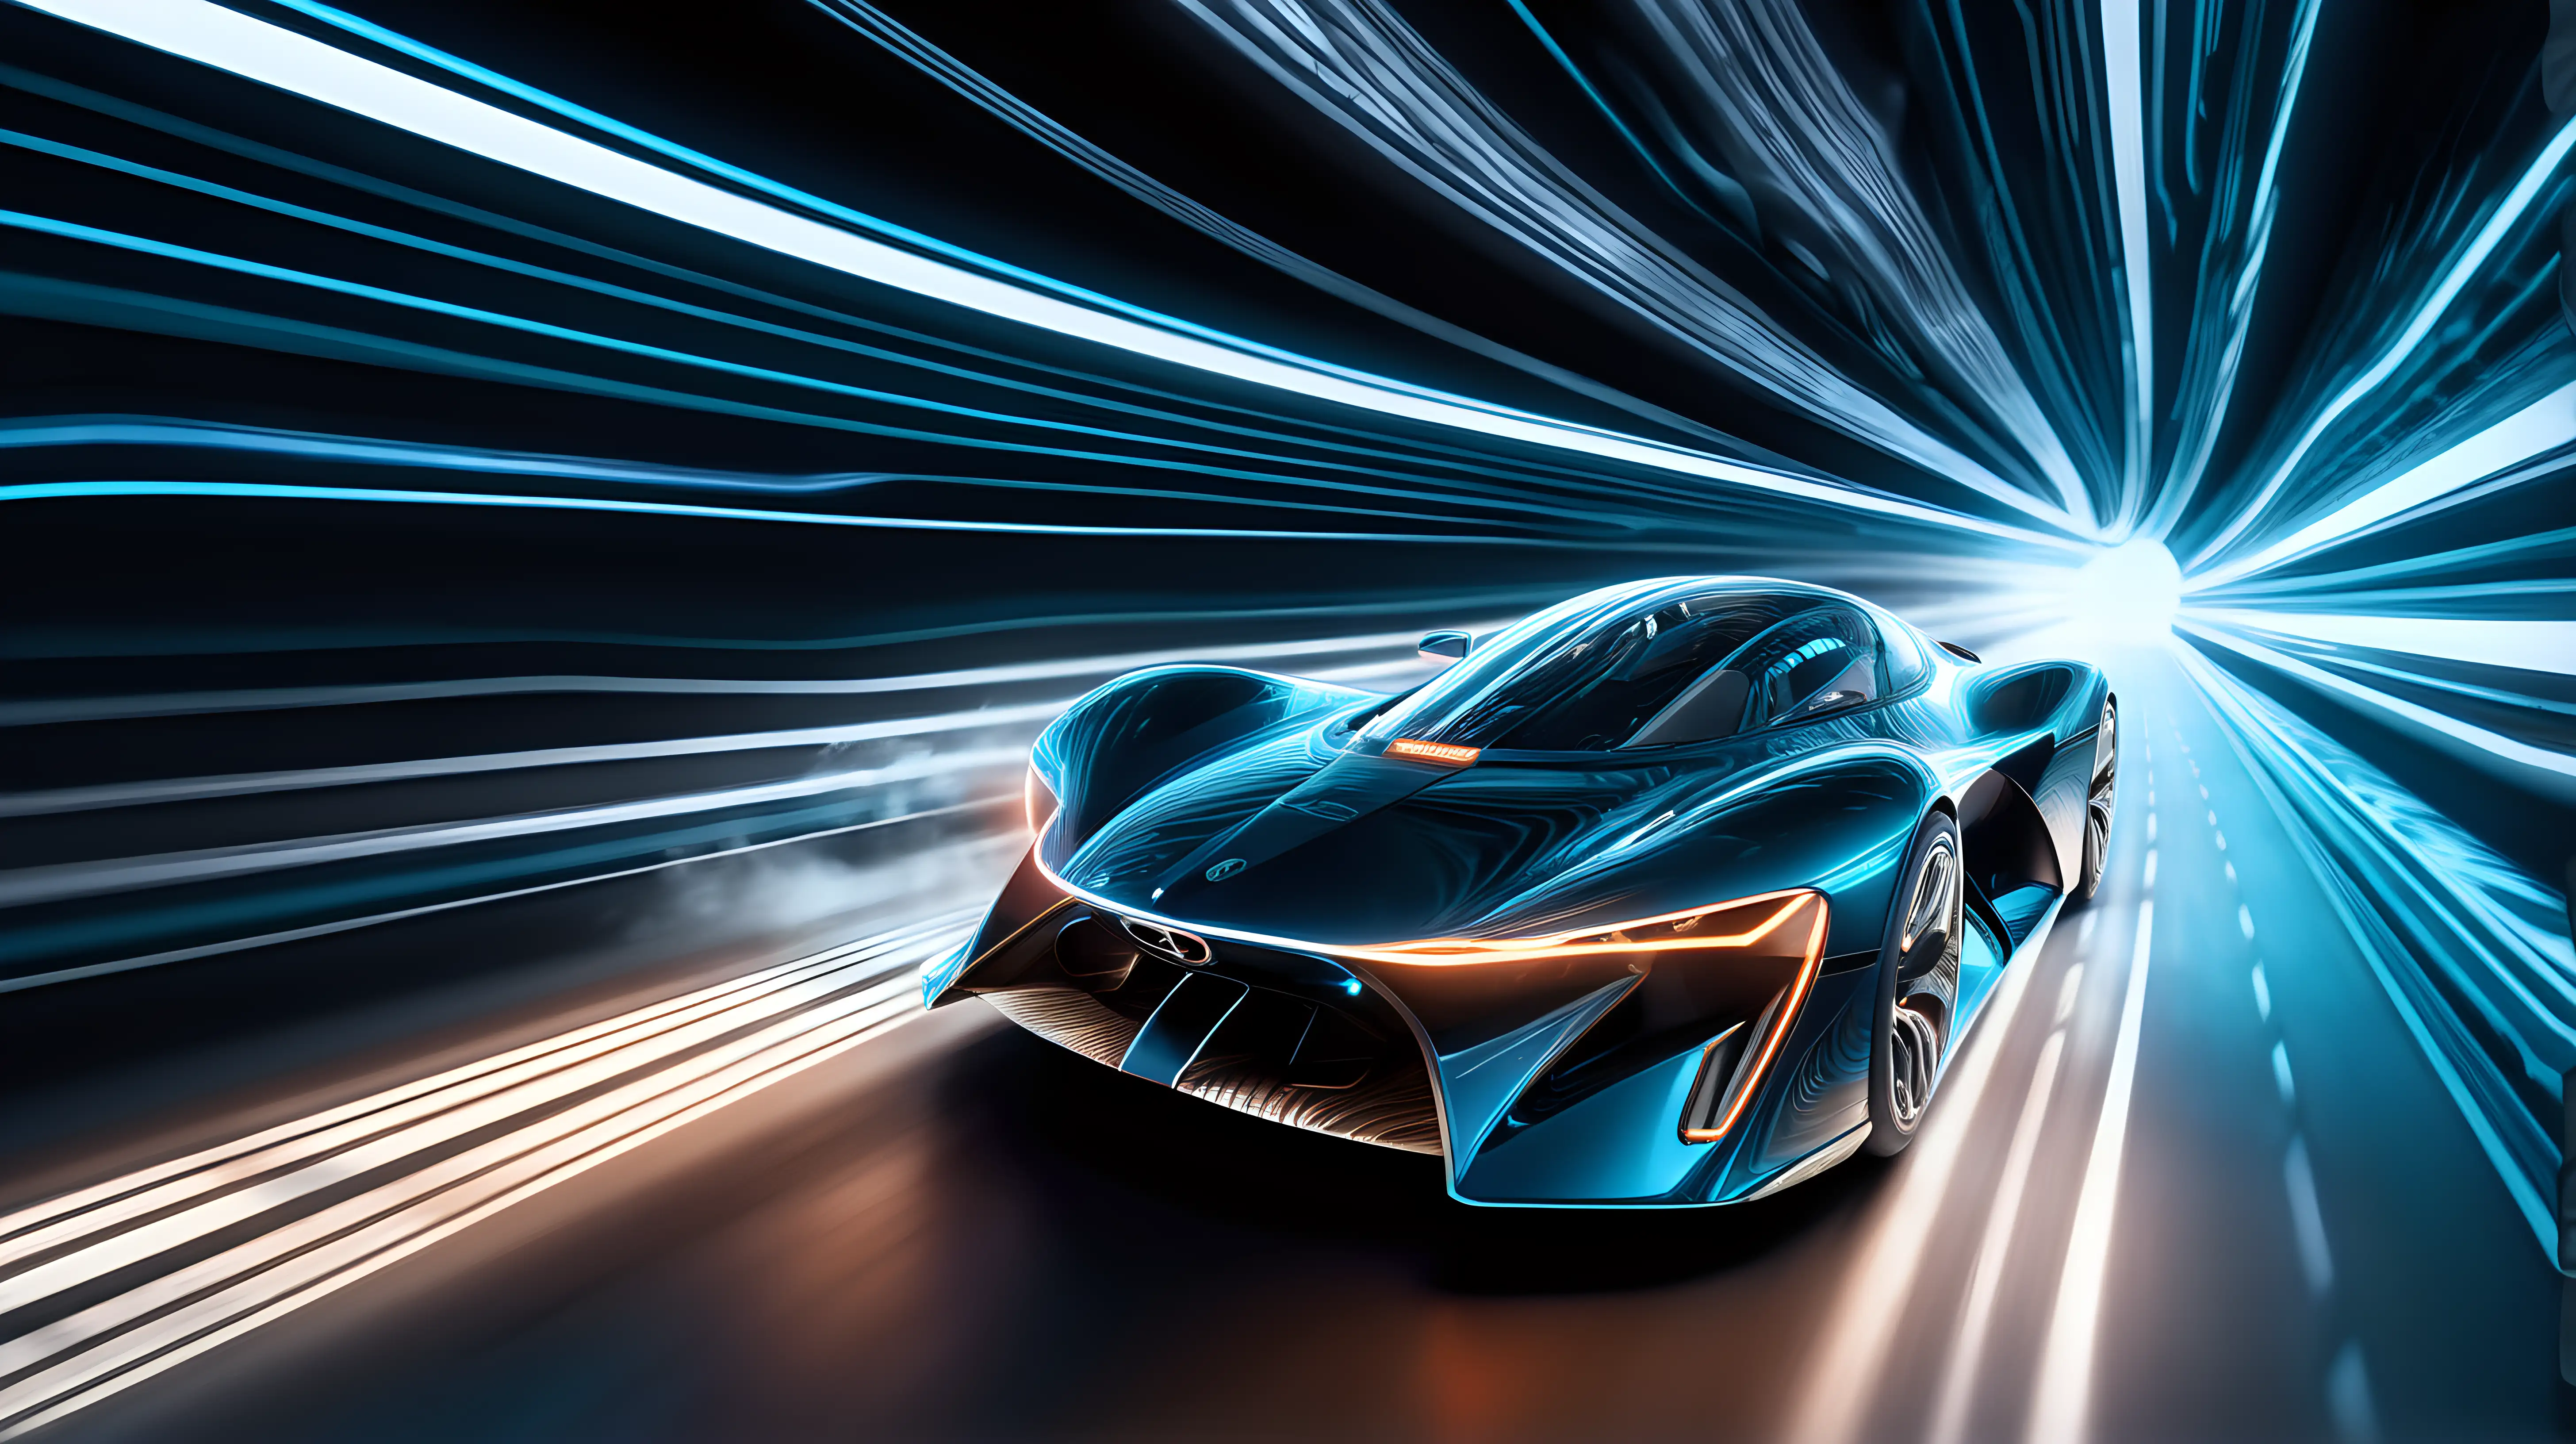 A futuristic high-speed car zooming through a tunnel, surrounded by swirling vortexes of light and energy, creating a mesmerizing visual spectacle against a pitch-black background.